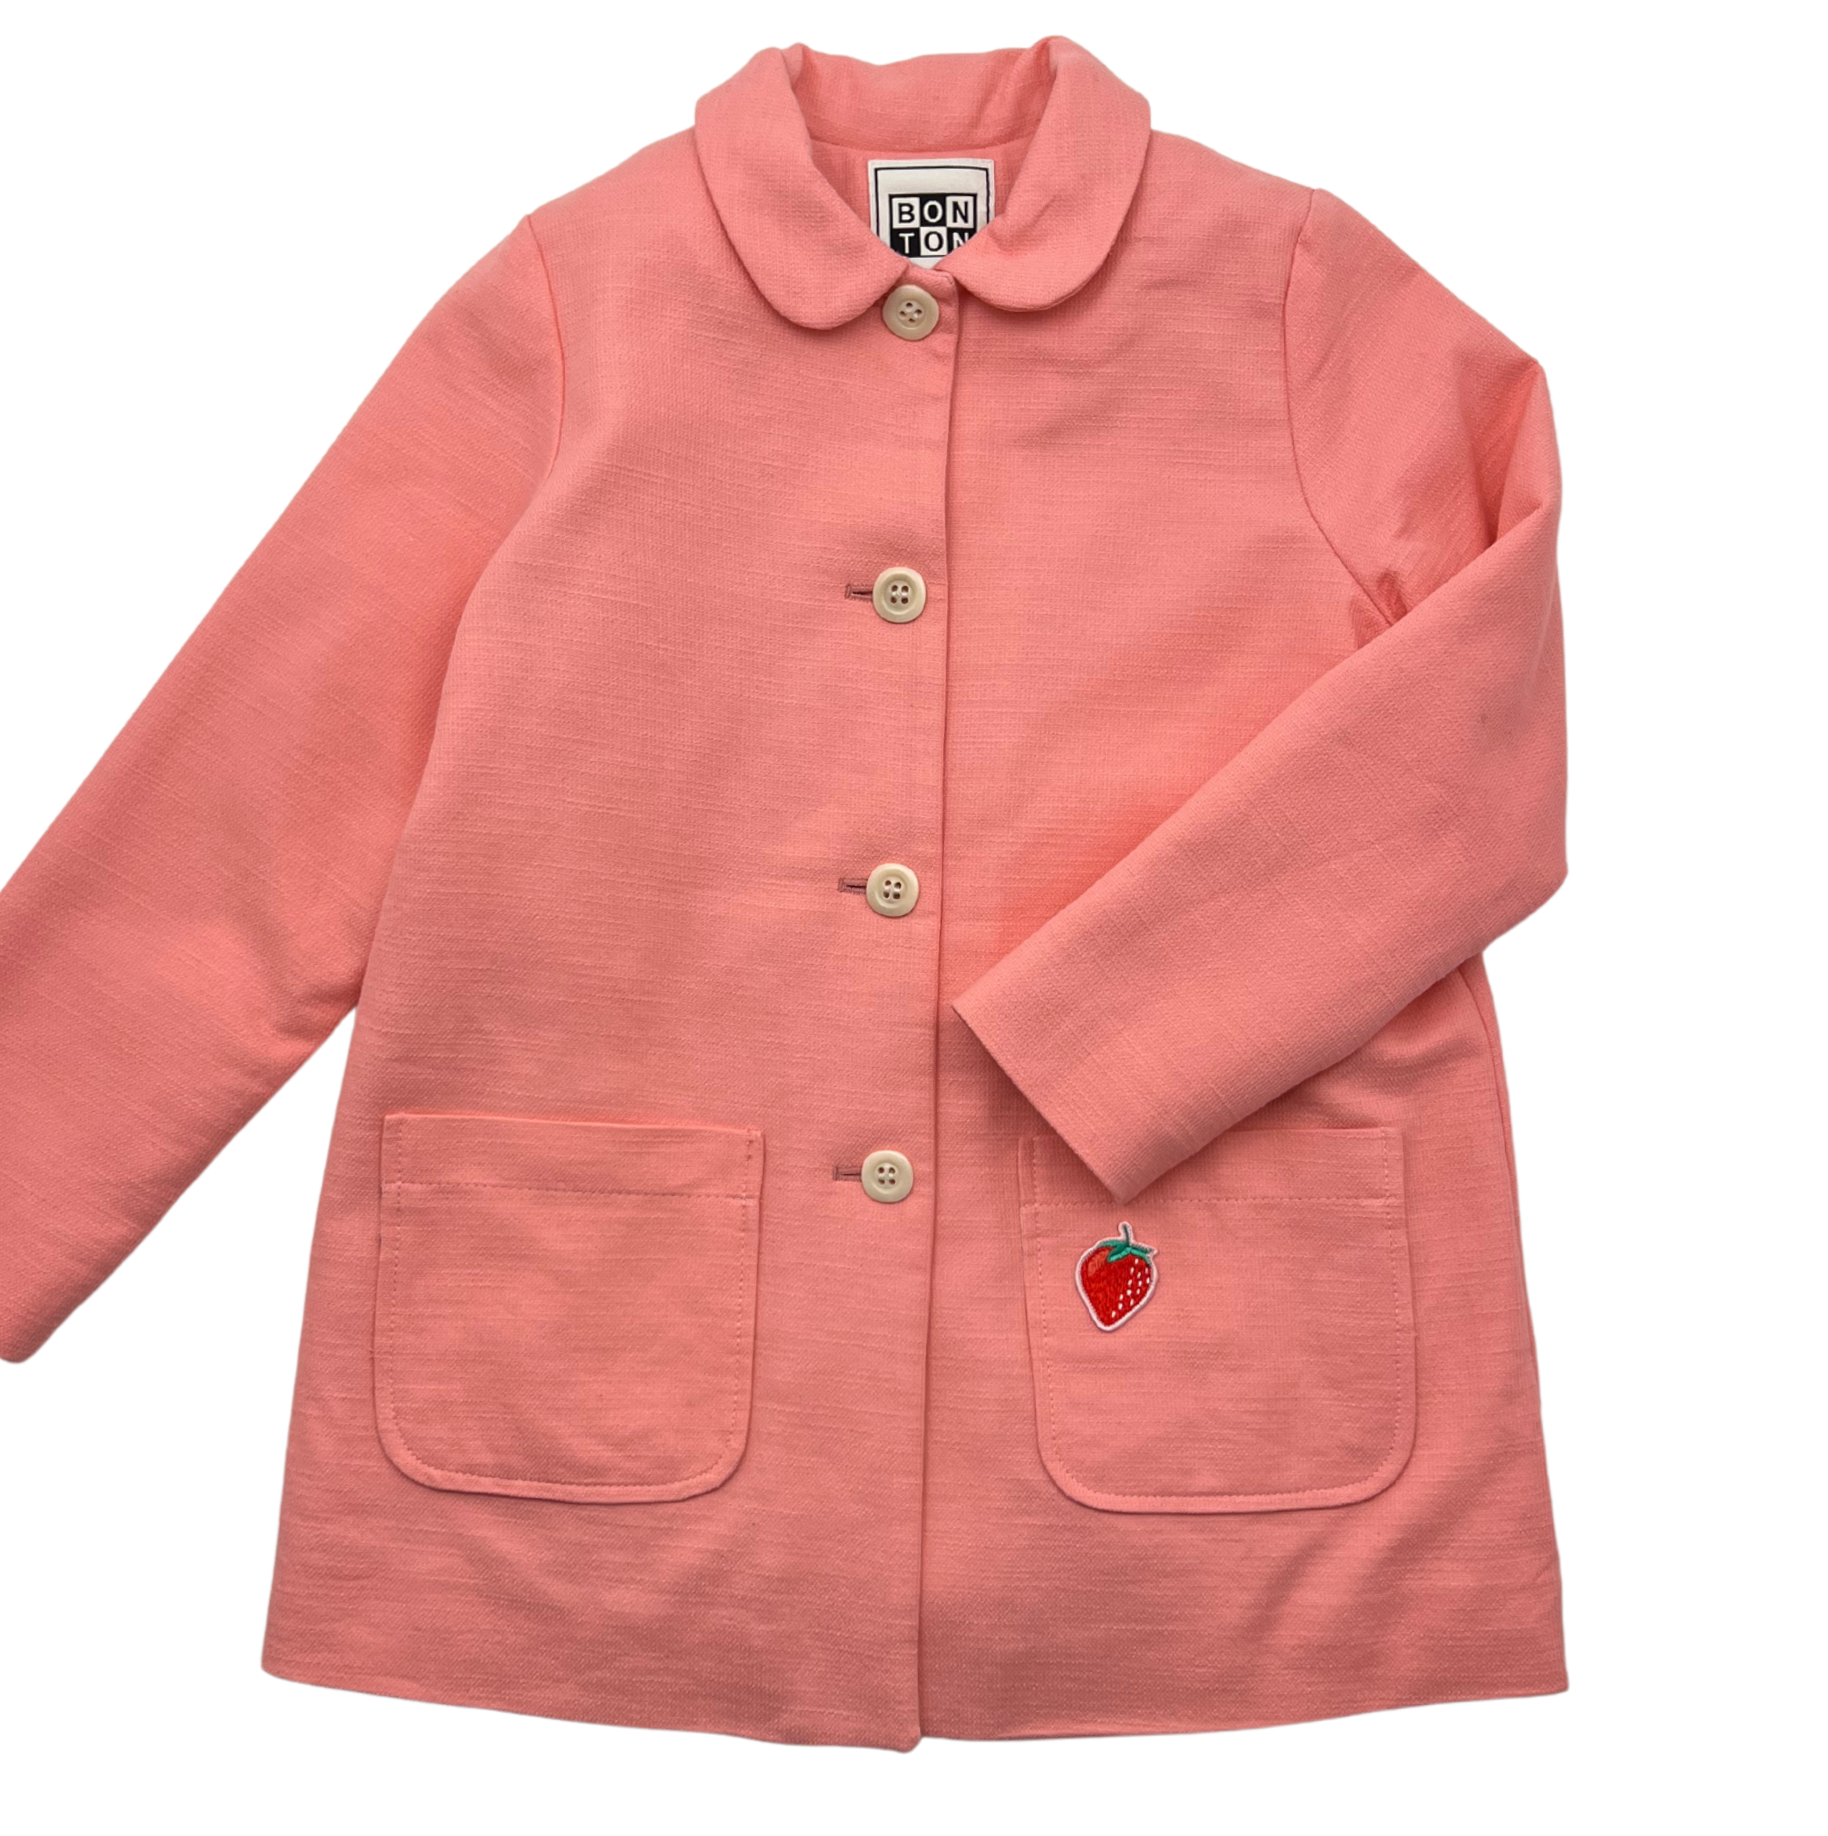 BONTON - Pink coat with strawberry - 10 years old